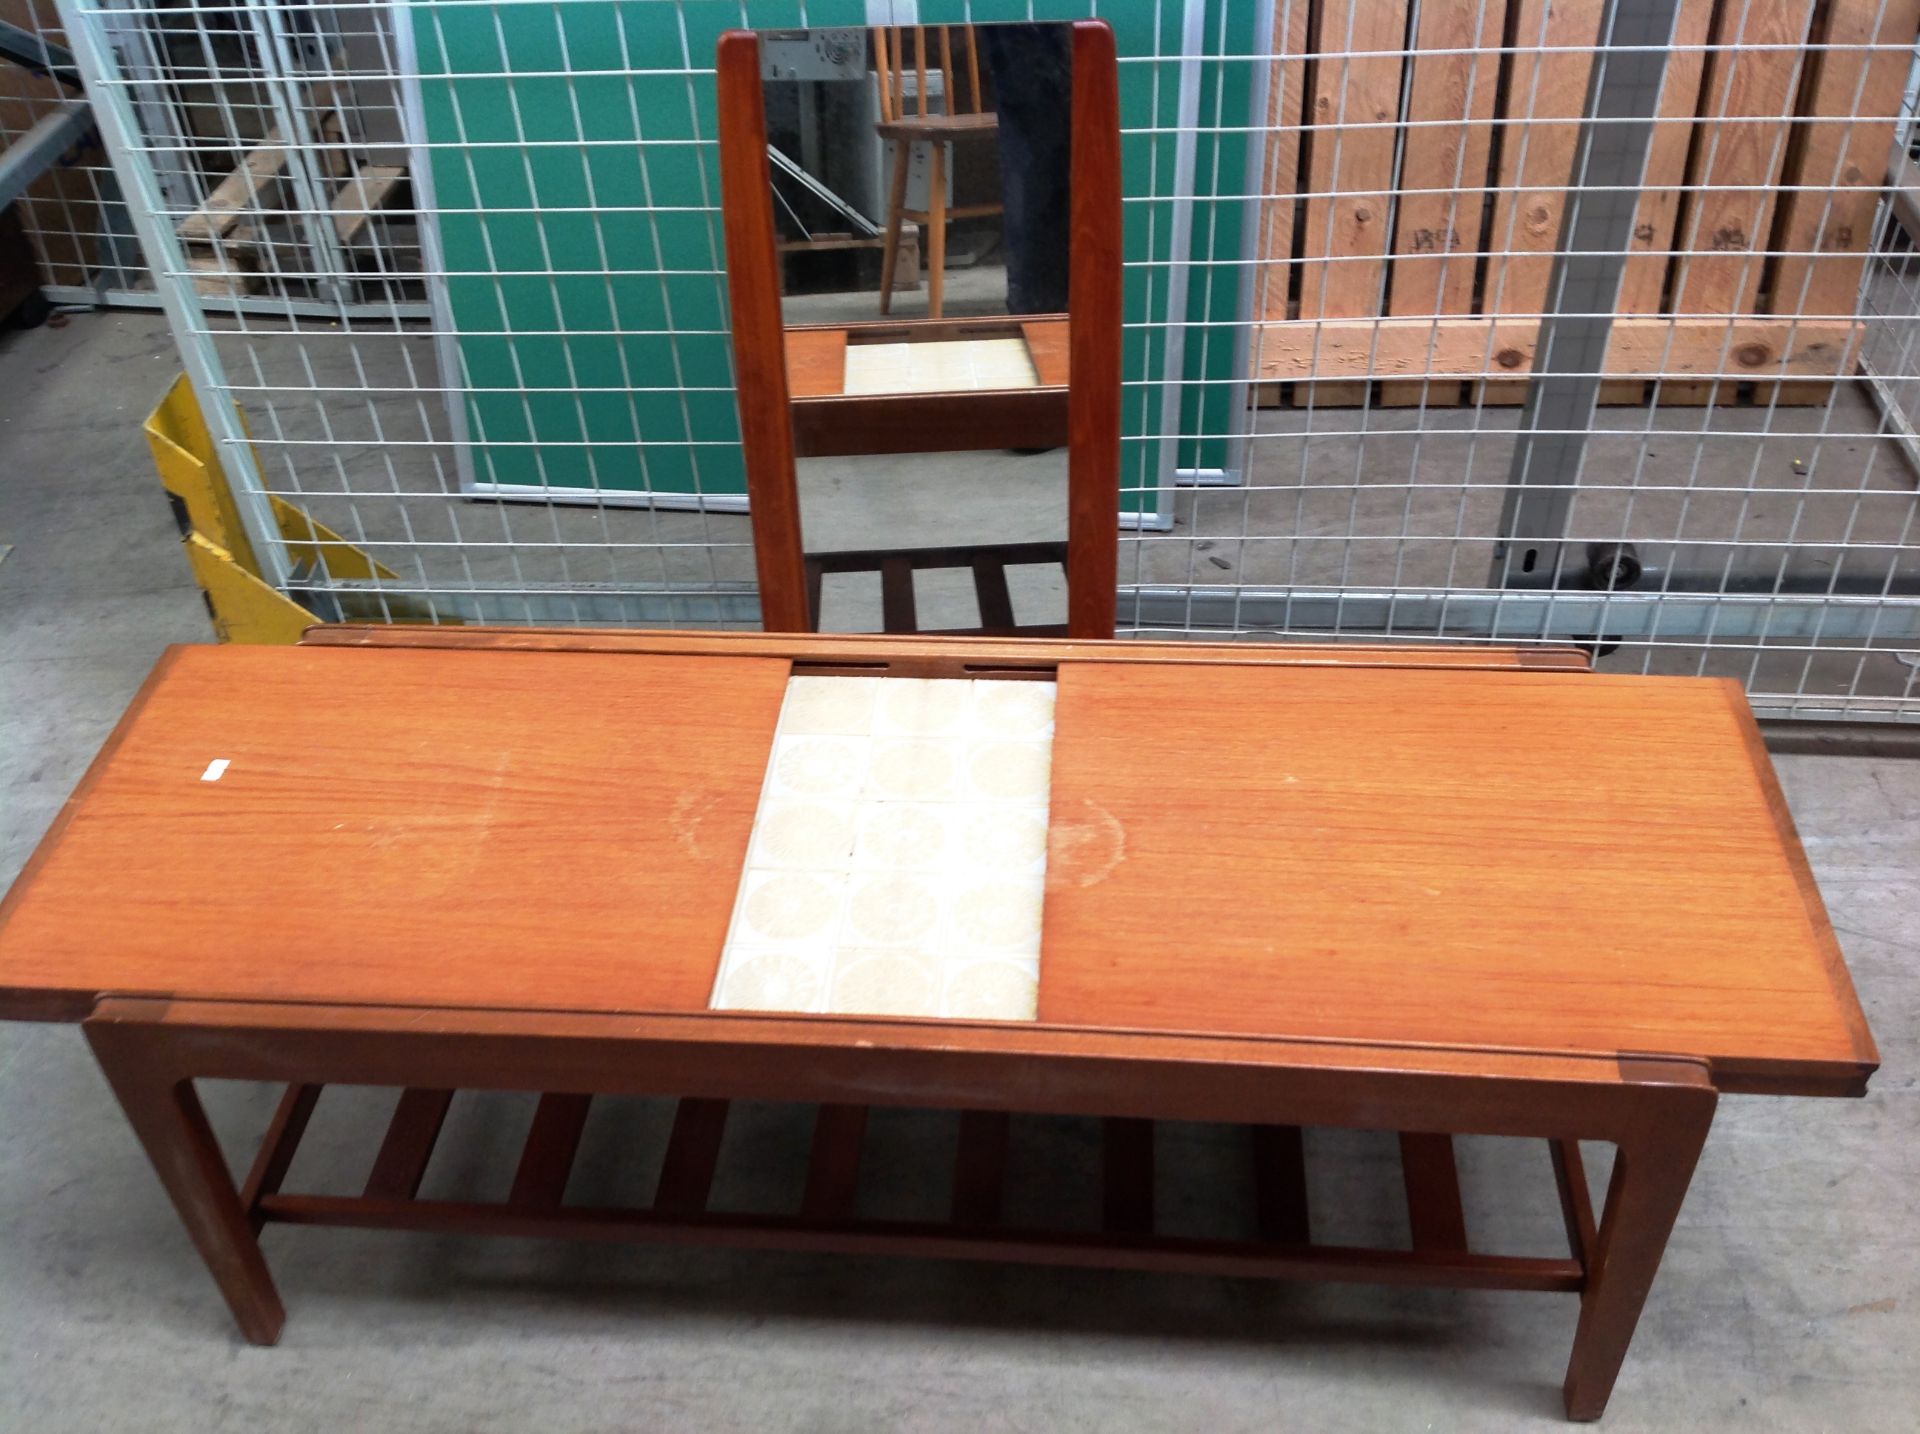 A teak coffee table with under tray and sliding top which reveals a tiled top and a teak framed